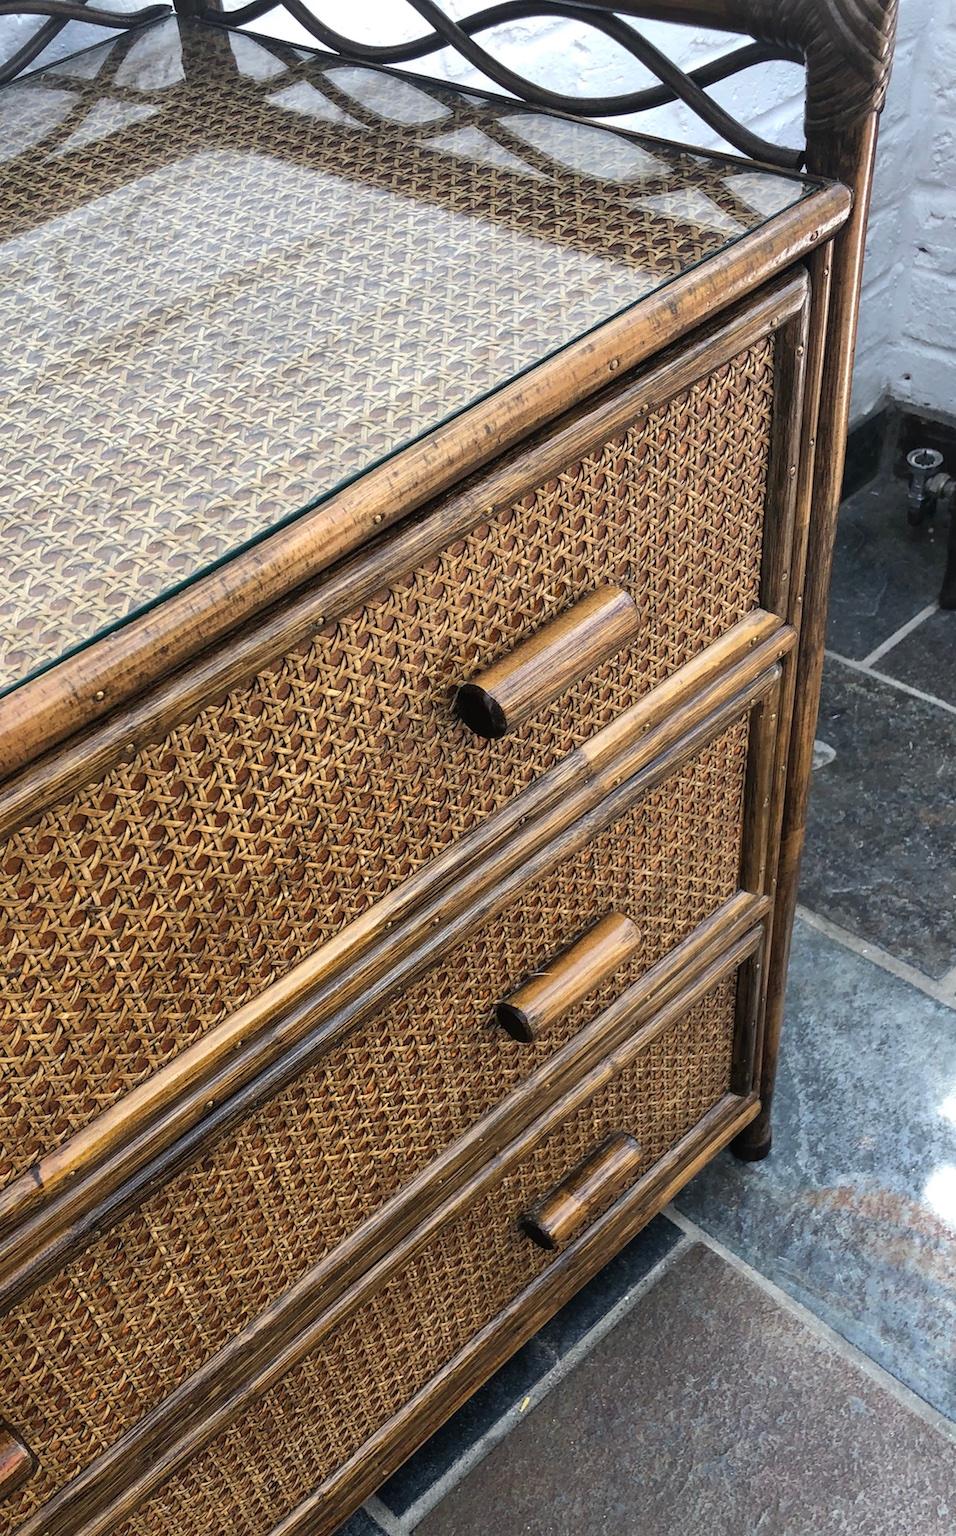 Mid-Century Modern Midcentury Rattan / Cane Chest of Drawers by Angraves, England, 1970s